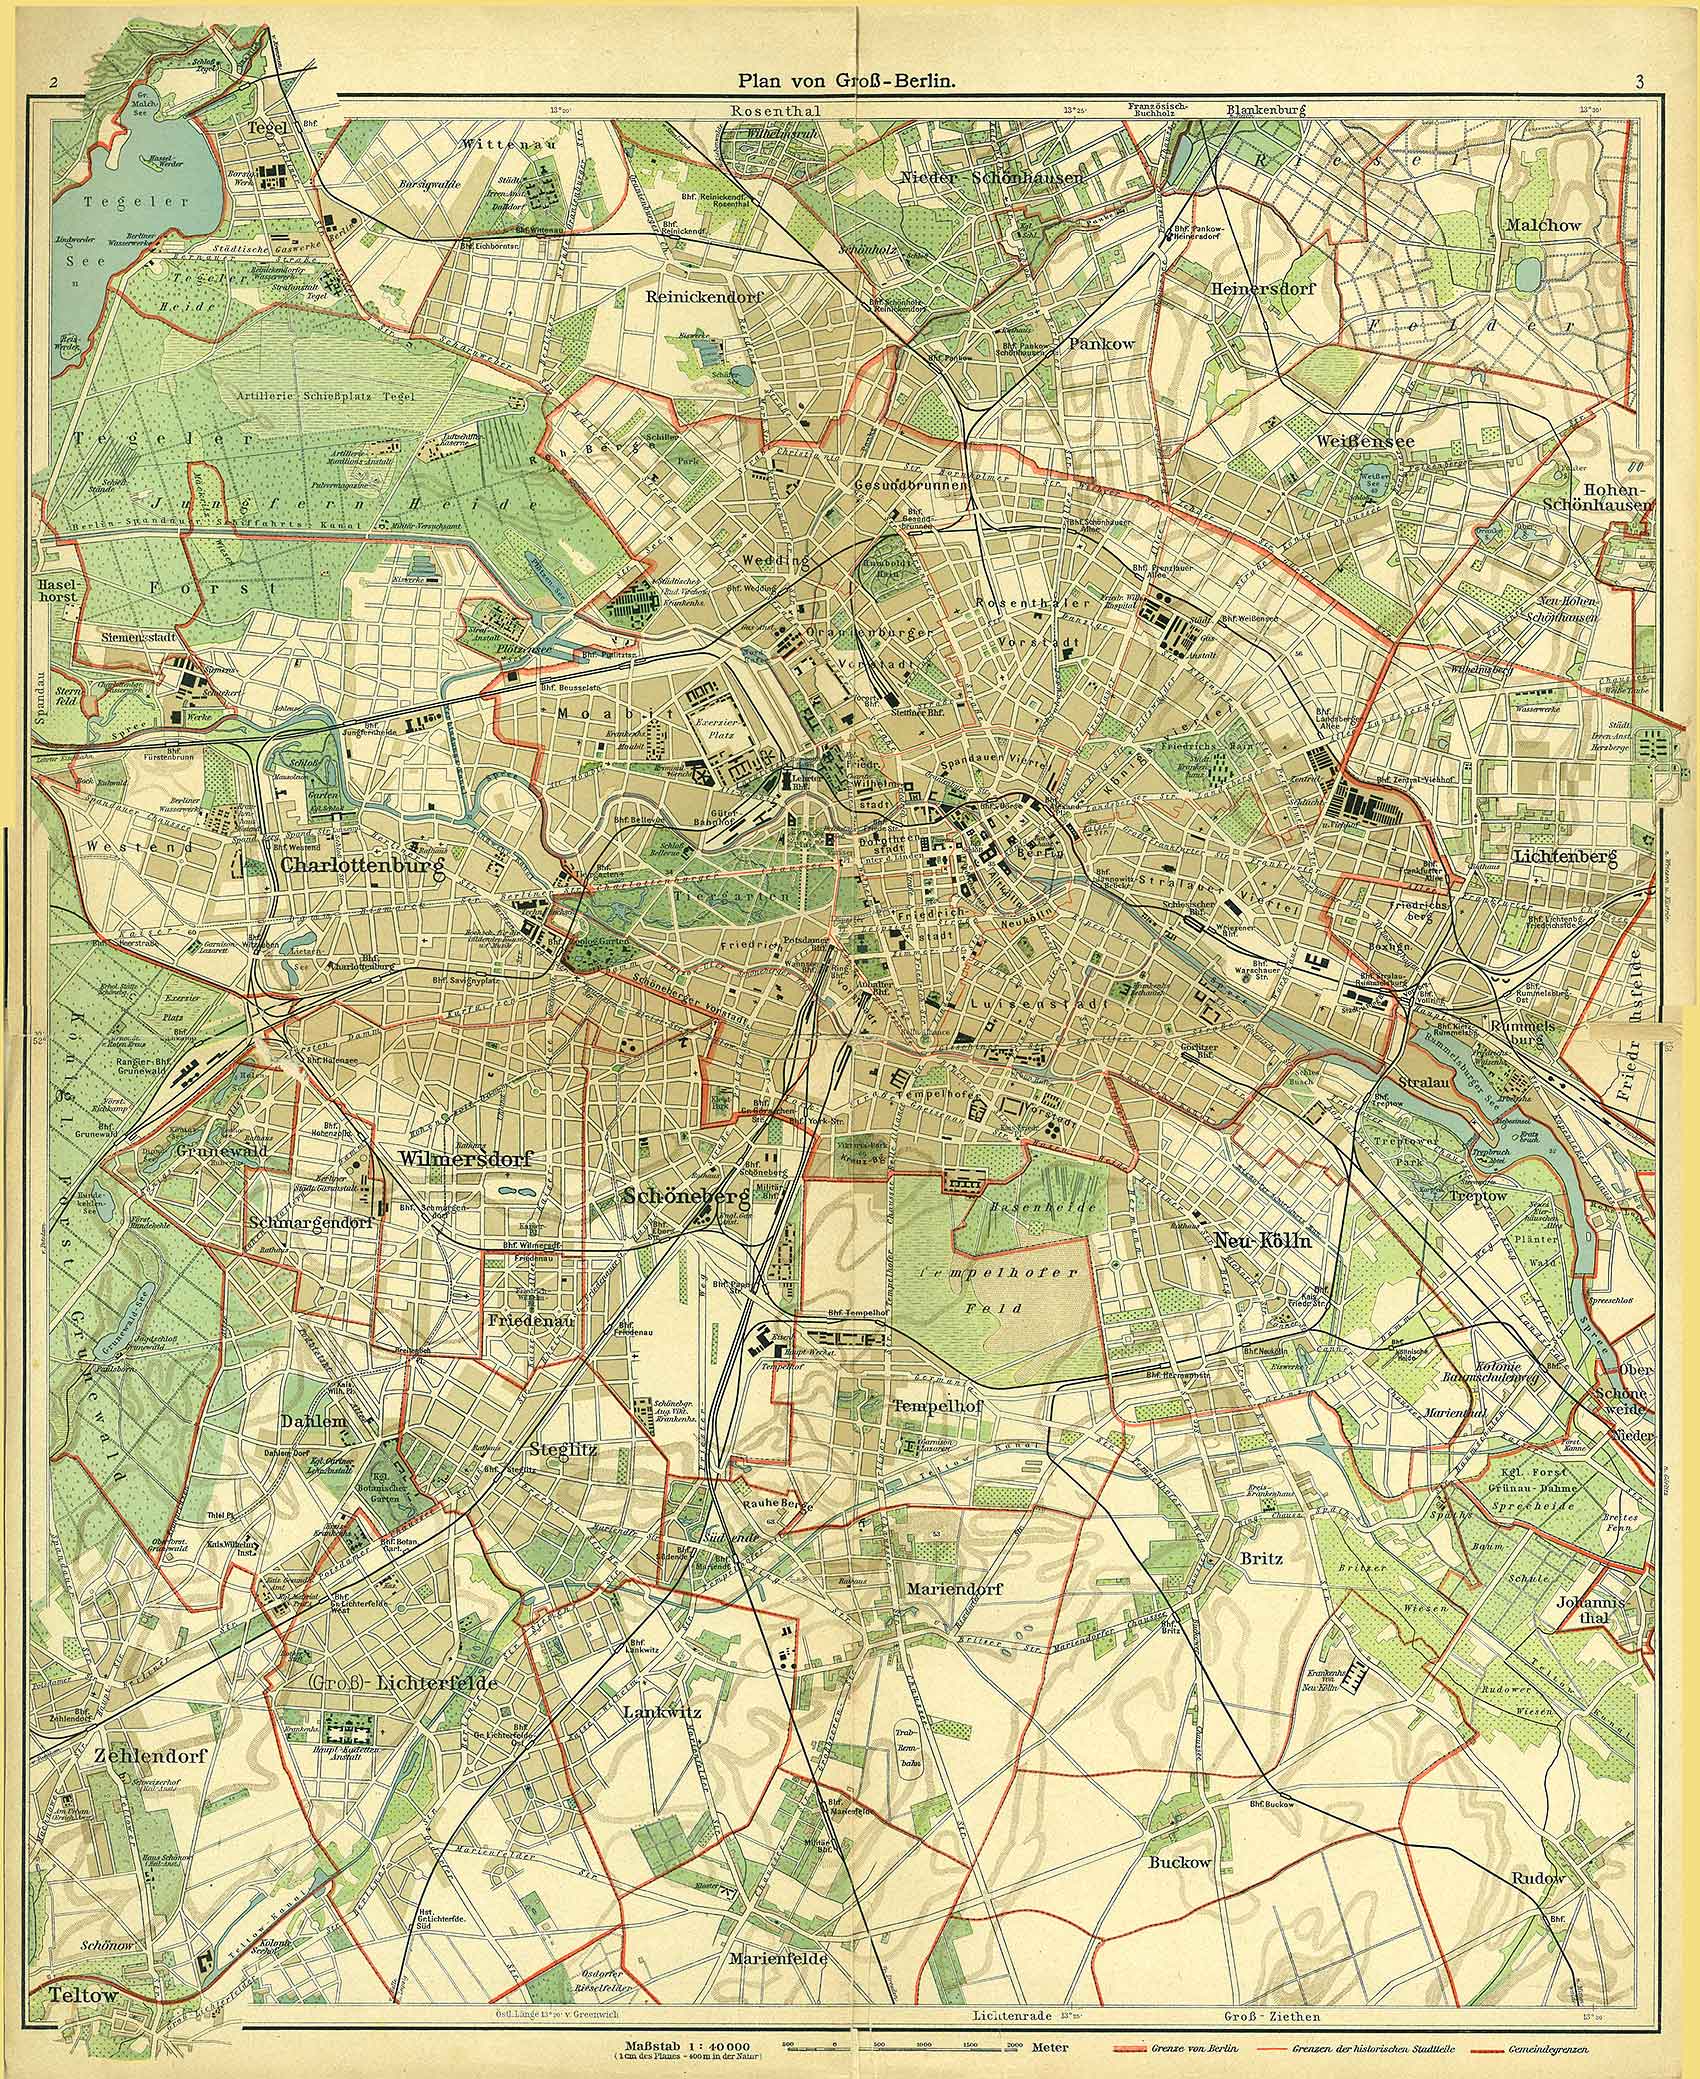 Greater Berlin, Andrees 'Berliner Schul-Atlas', 1916, pages 2 to 3, published size to print borders 45.28 cm wide by 55.46 cm high.